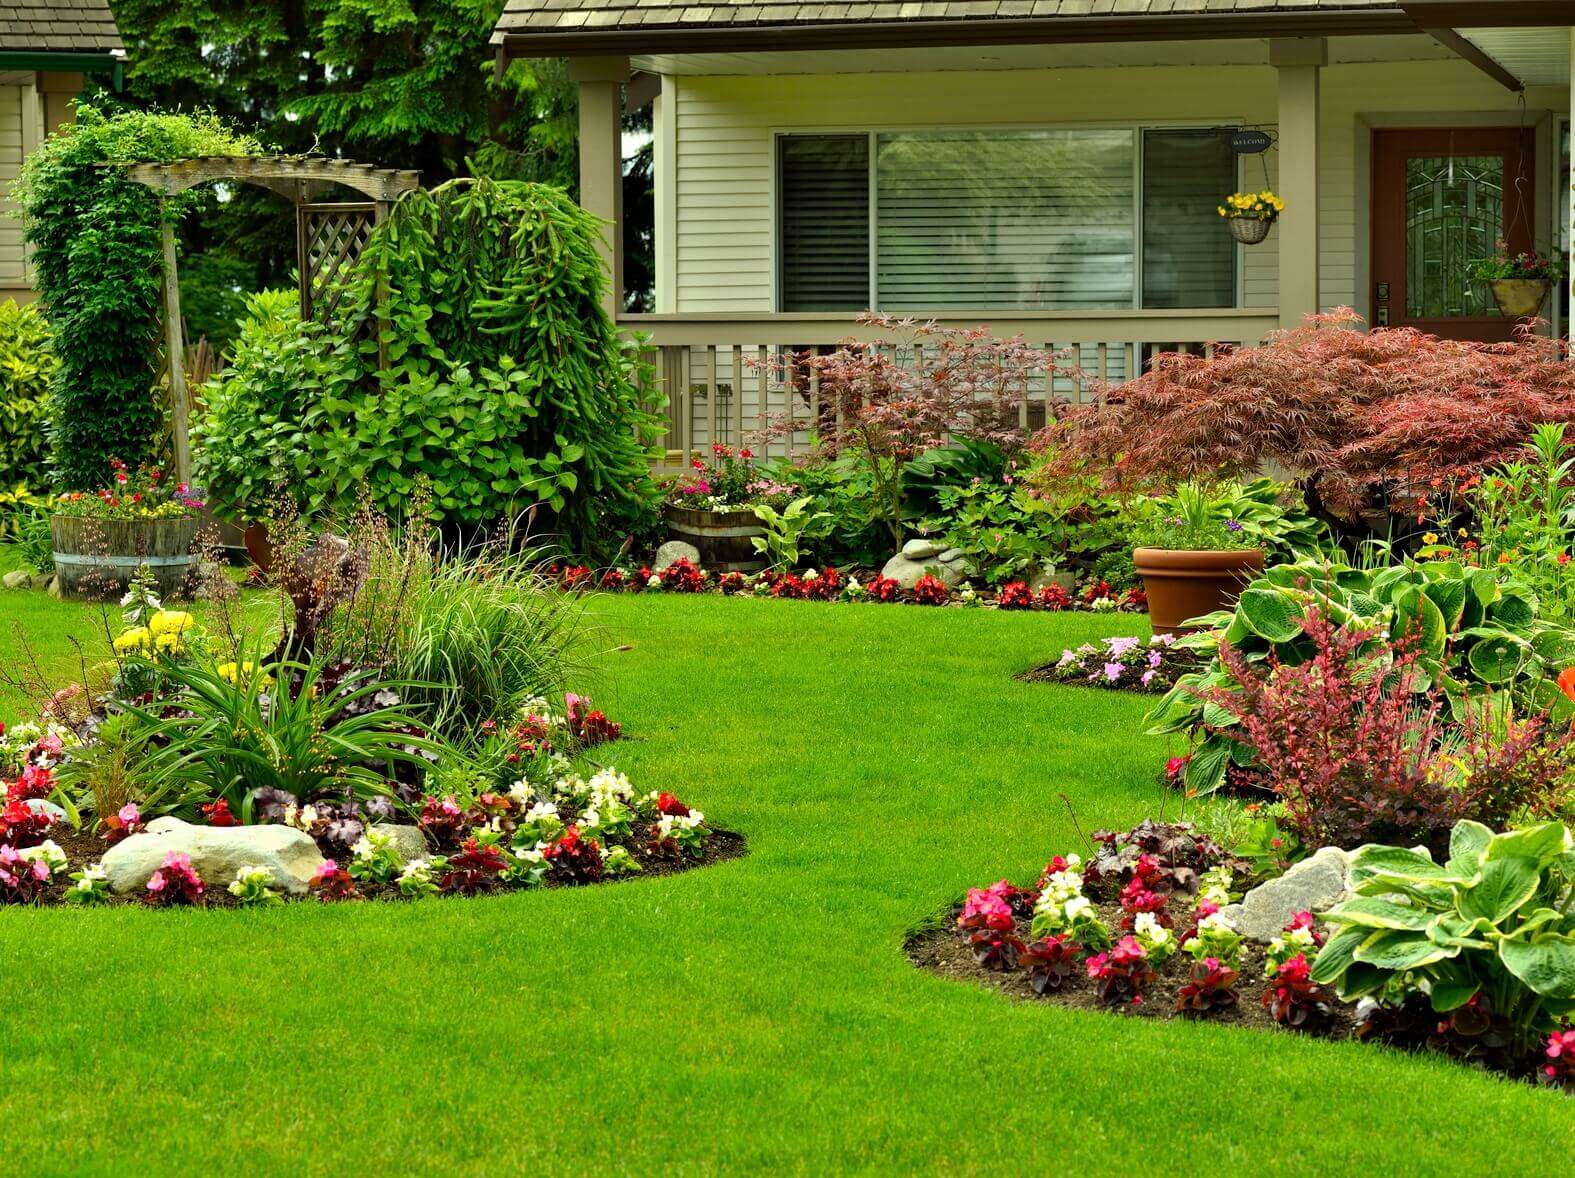 How do I hire an ideal landscaping company?